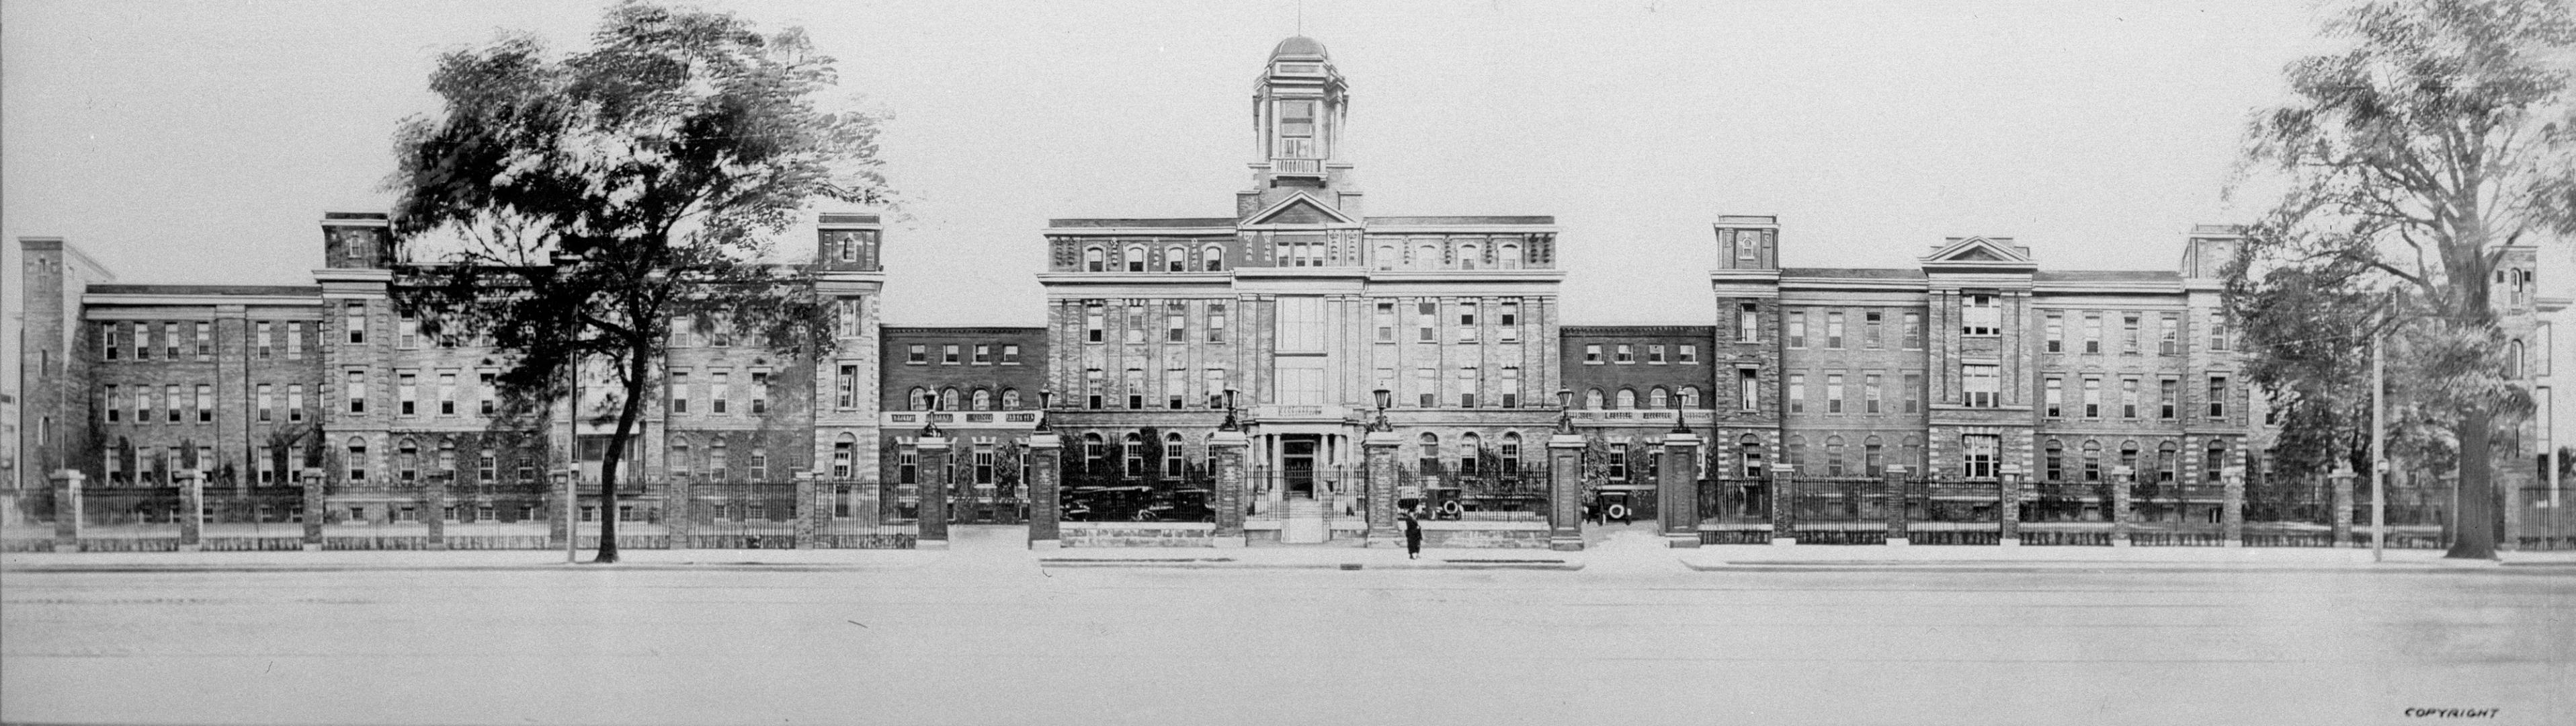 Toronto General Hospital (opened 1913), College St